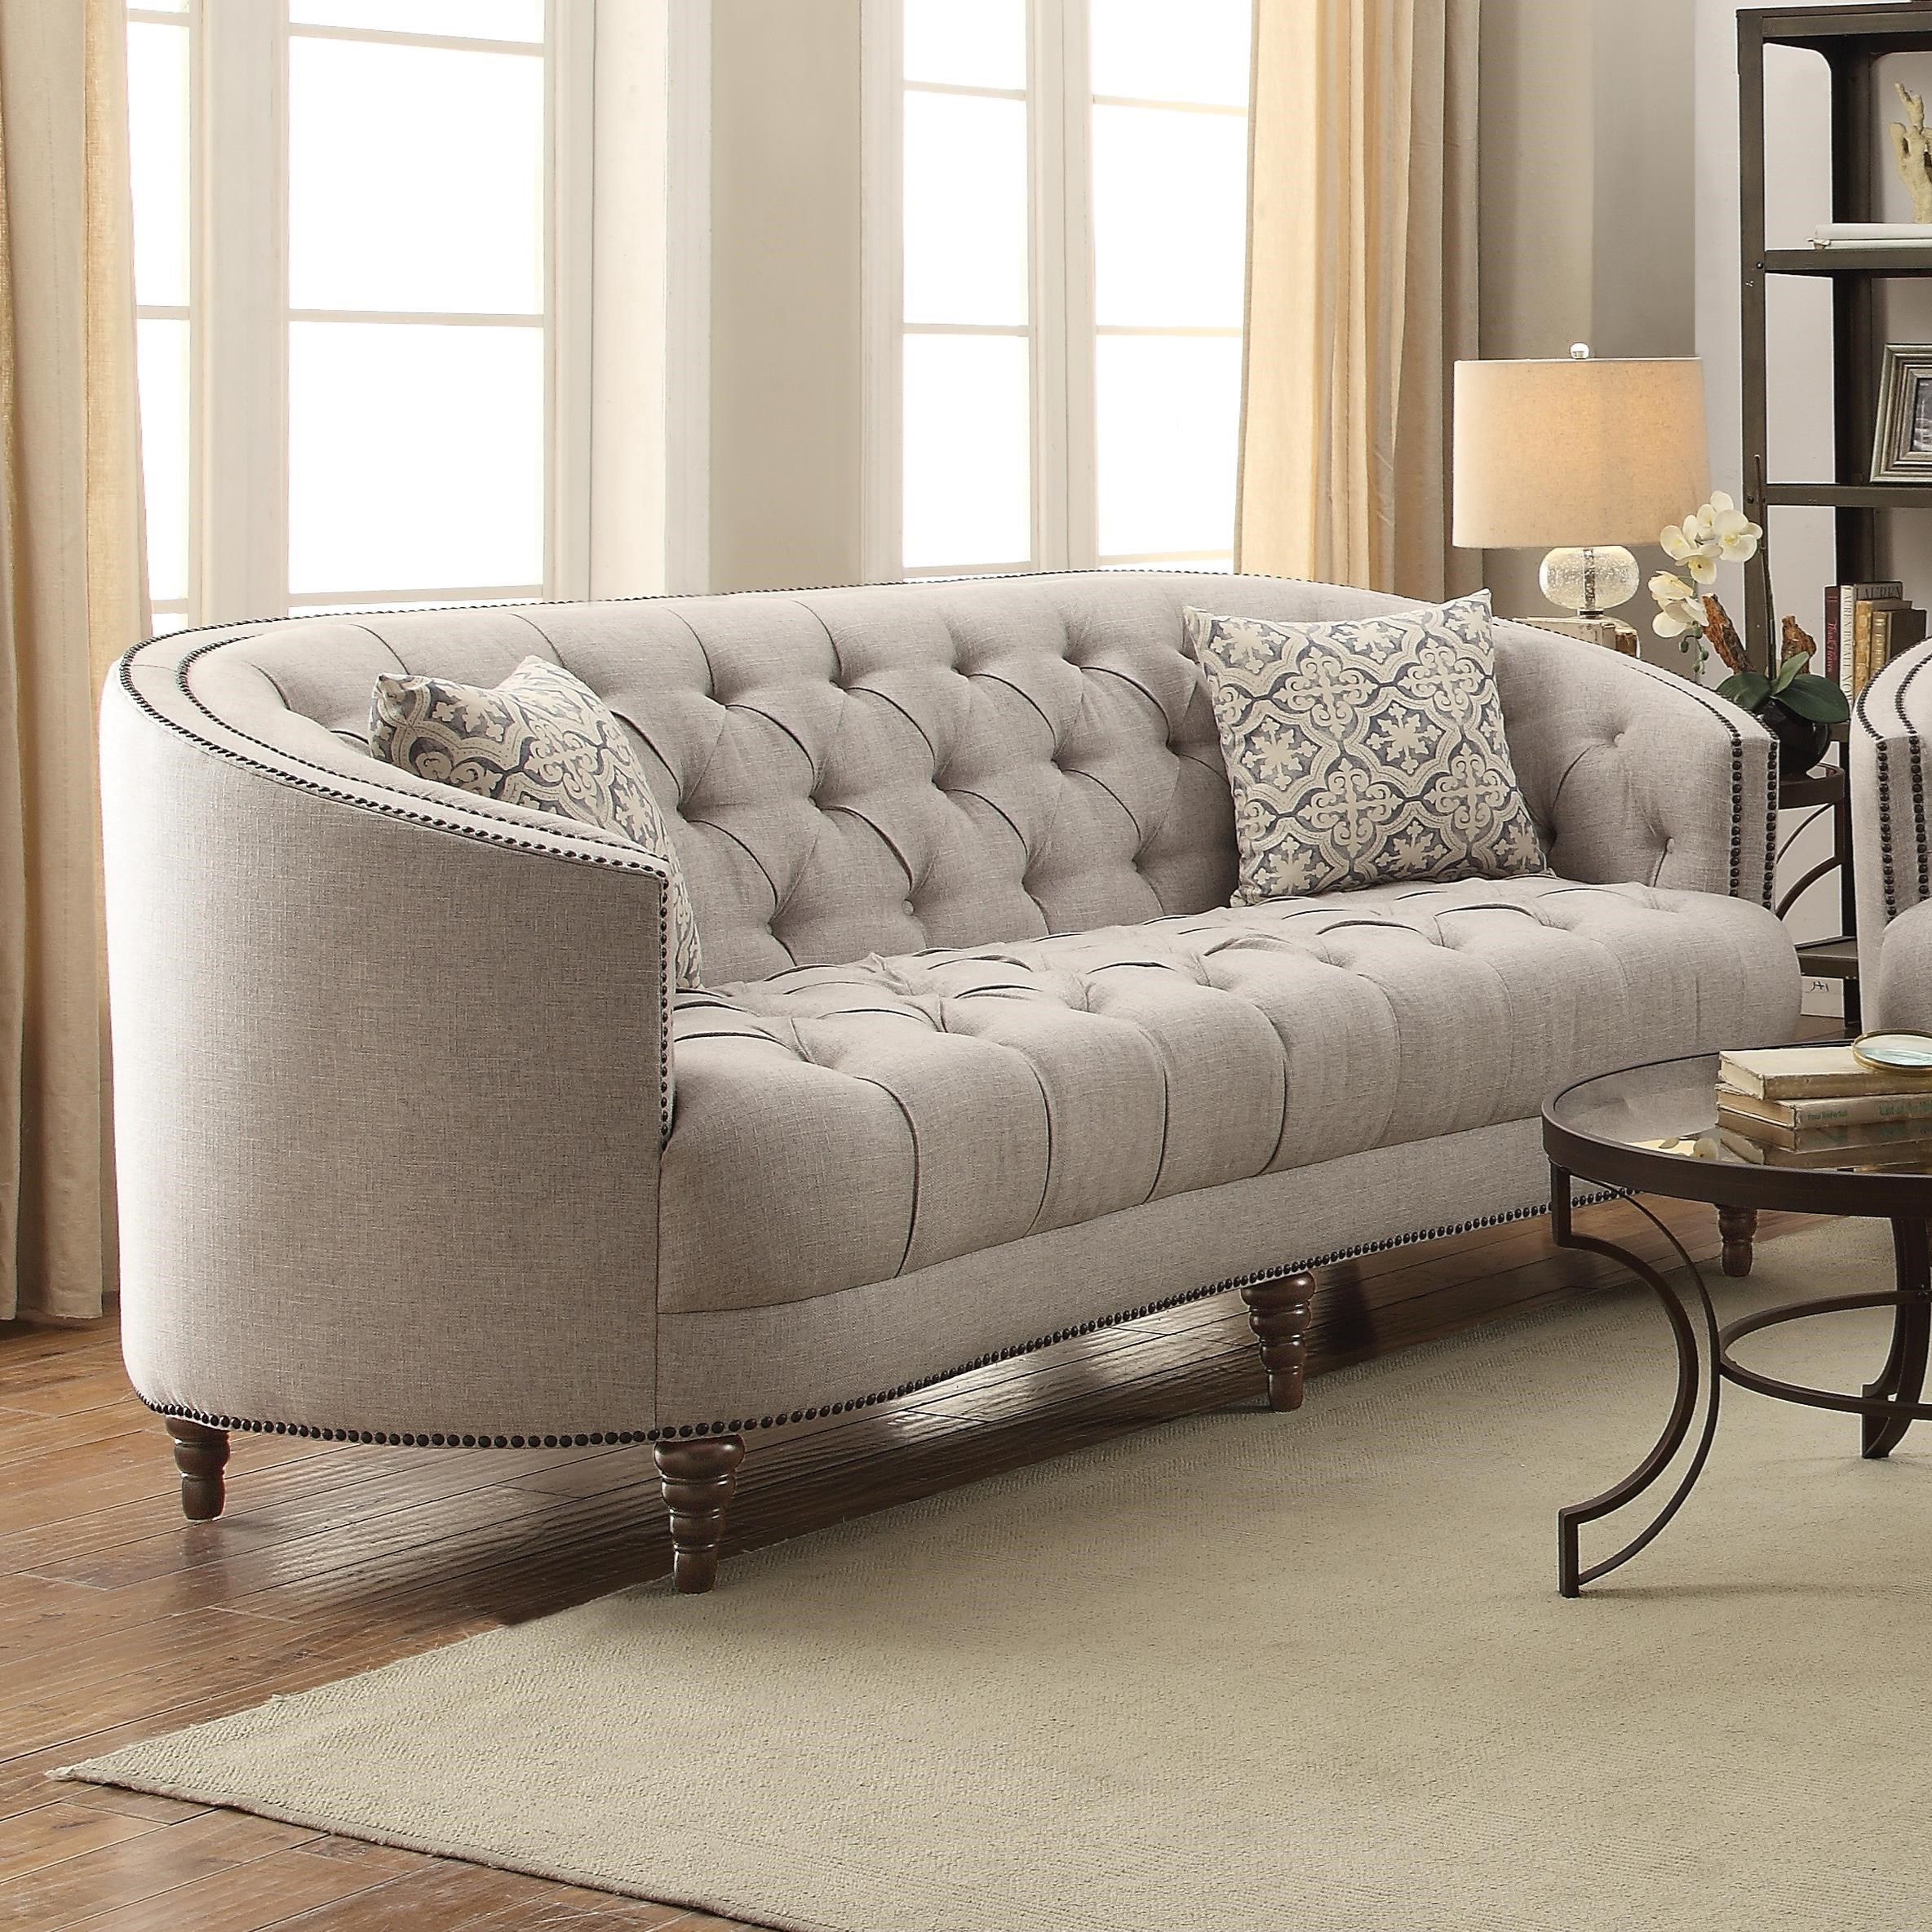 Coaster Avonlea C Shaped Sofa With Button Tufting And Nailhead Trim With Tufted Upholstered Sofas (Gallery 14 of 20)